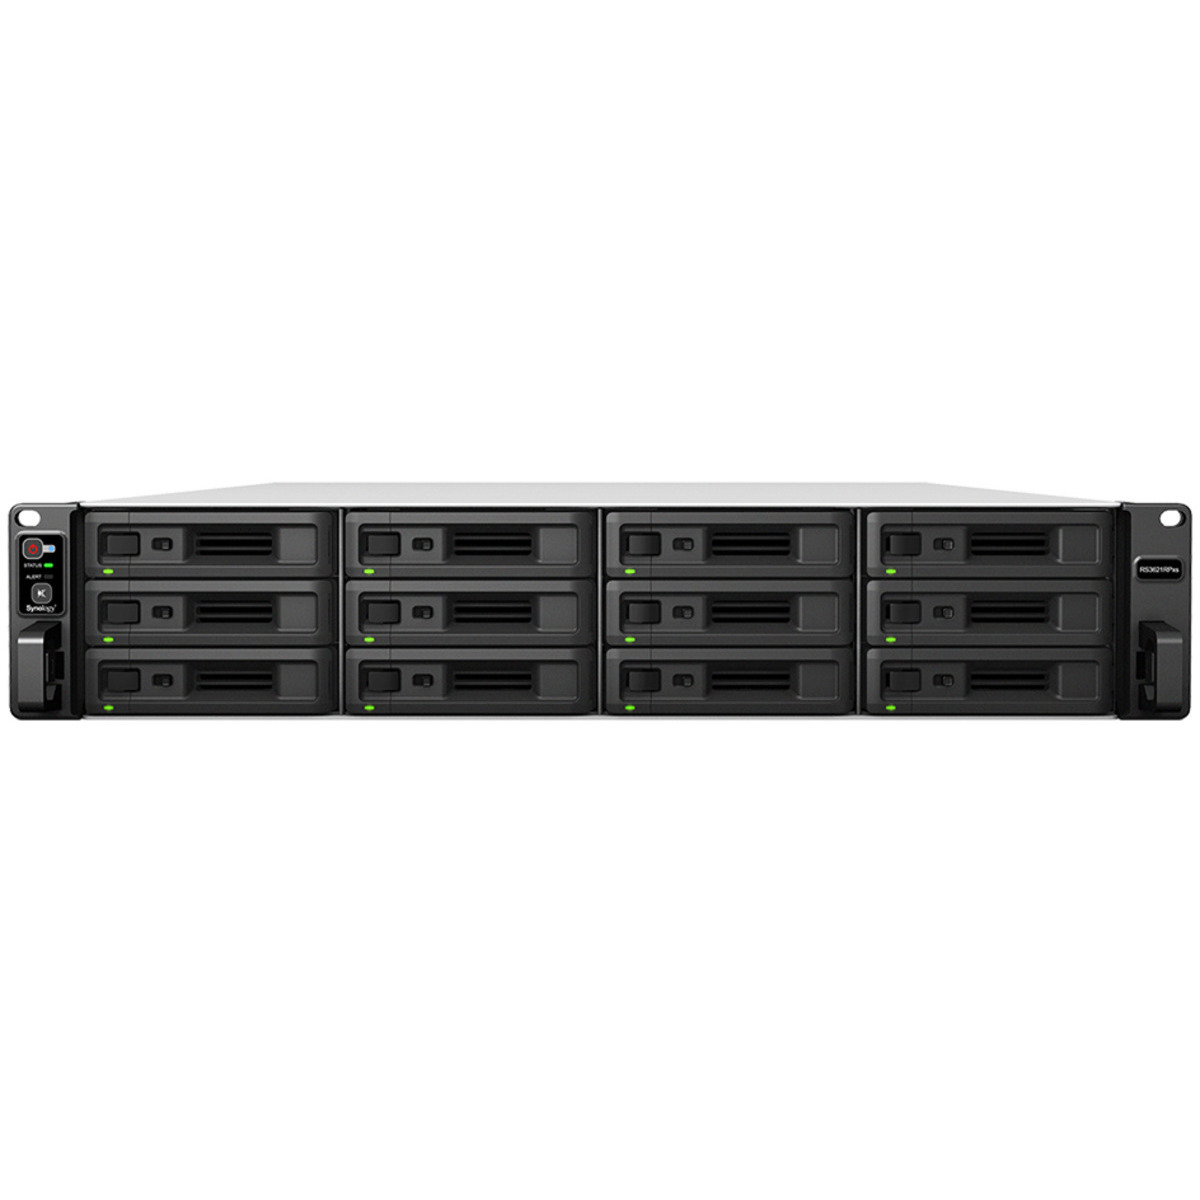 Synology RackStation RS3621RPxs 44tb 12-Bay RackMount Large Business / Enterprise NAS - Network Attached Storage Device 11x4tb Seagate EXOS 7E10 ST4000NM024B 3.5 7200rpm SATA 6Gb/s HDD ENTERPRISE Class Drives Installed - Burn-In Tested RackStation RS3621RPxs